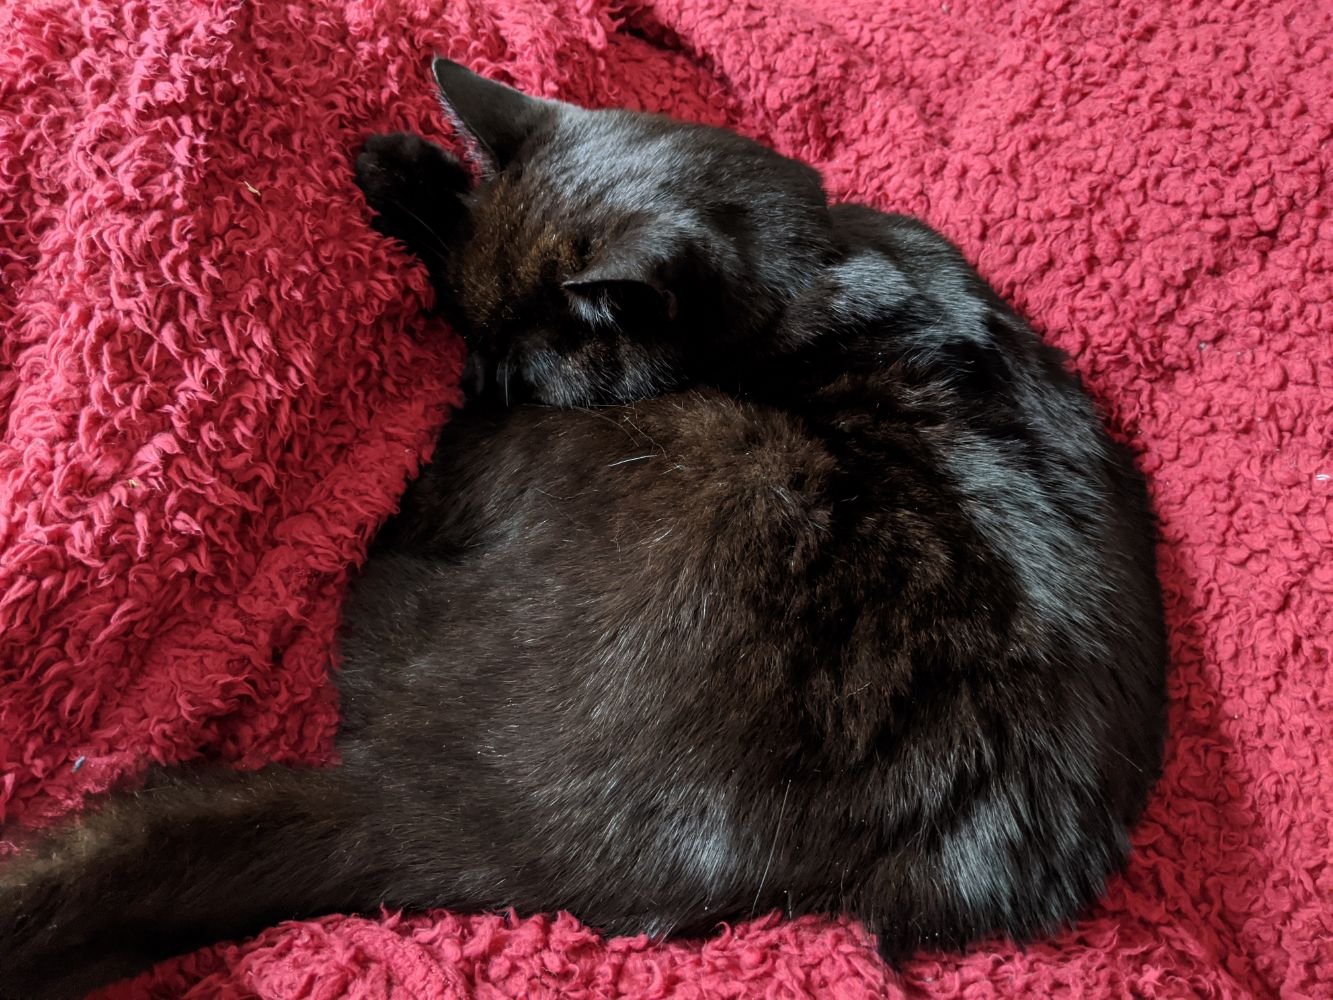 Black cat lying in Jamie's lap, sitting in a little square, on a red blanket